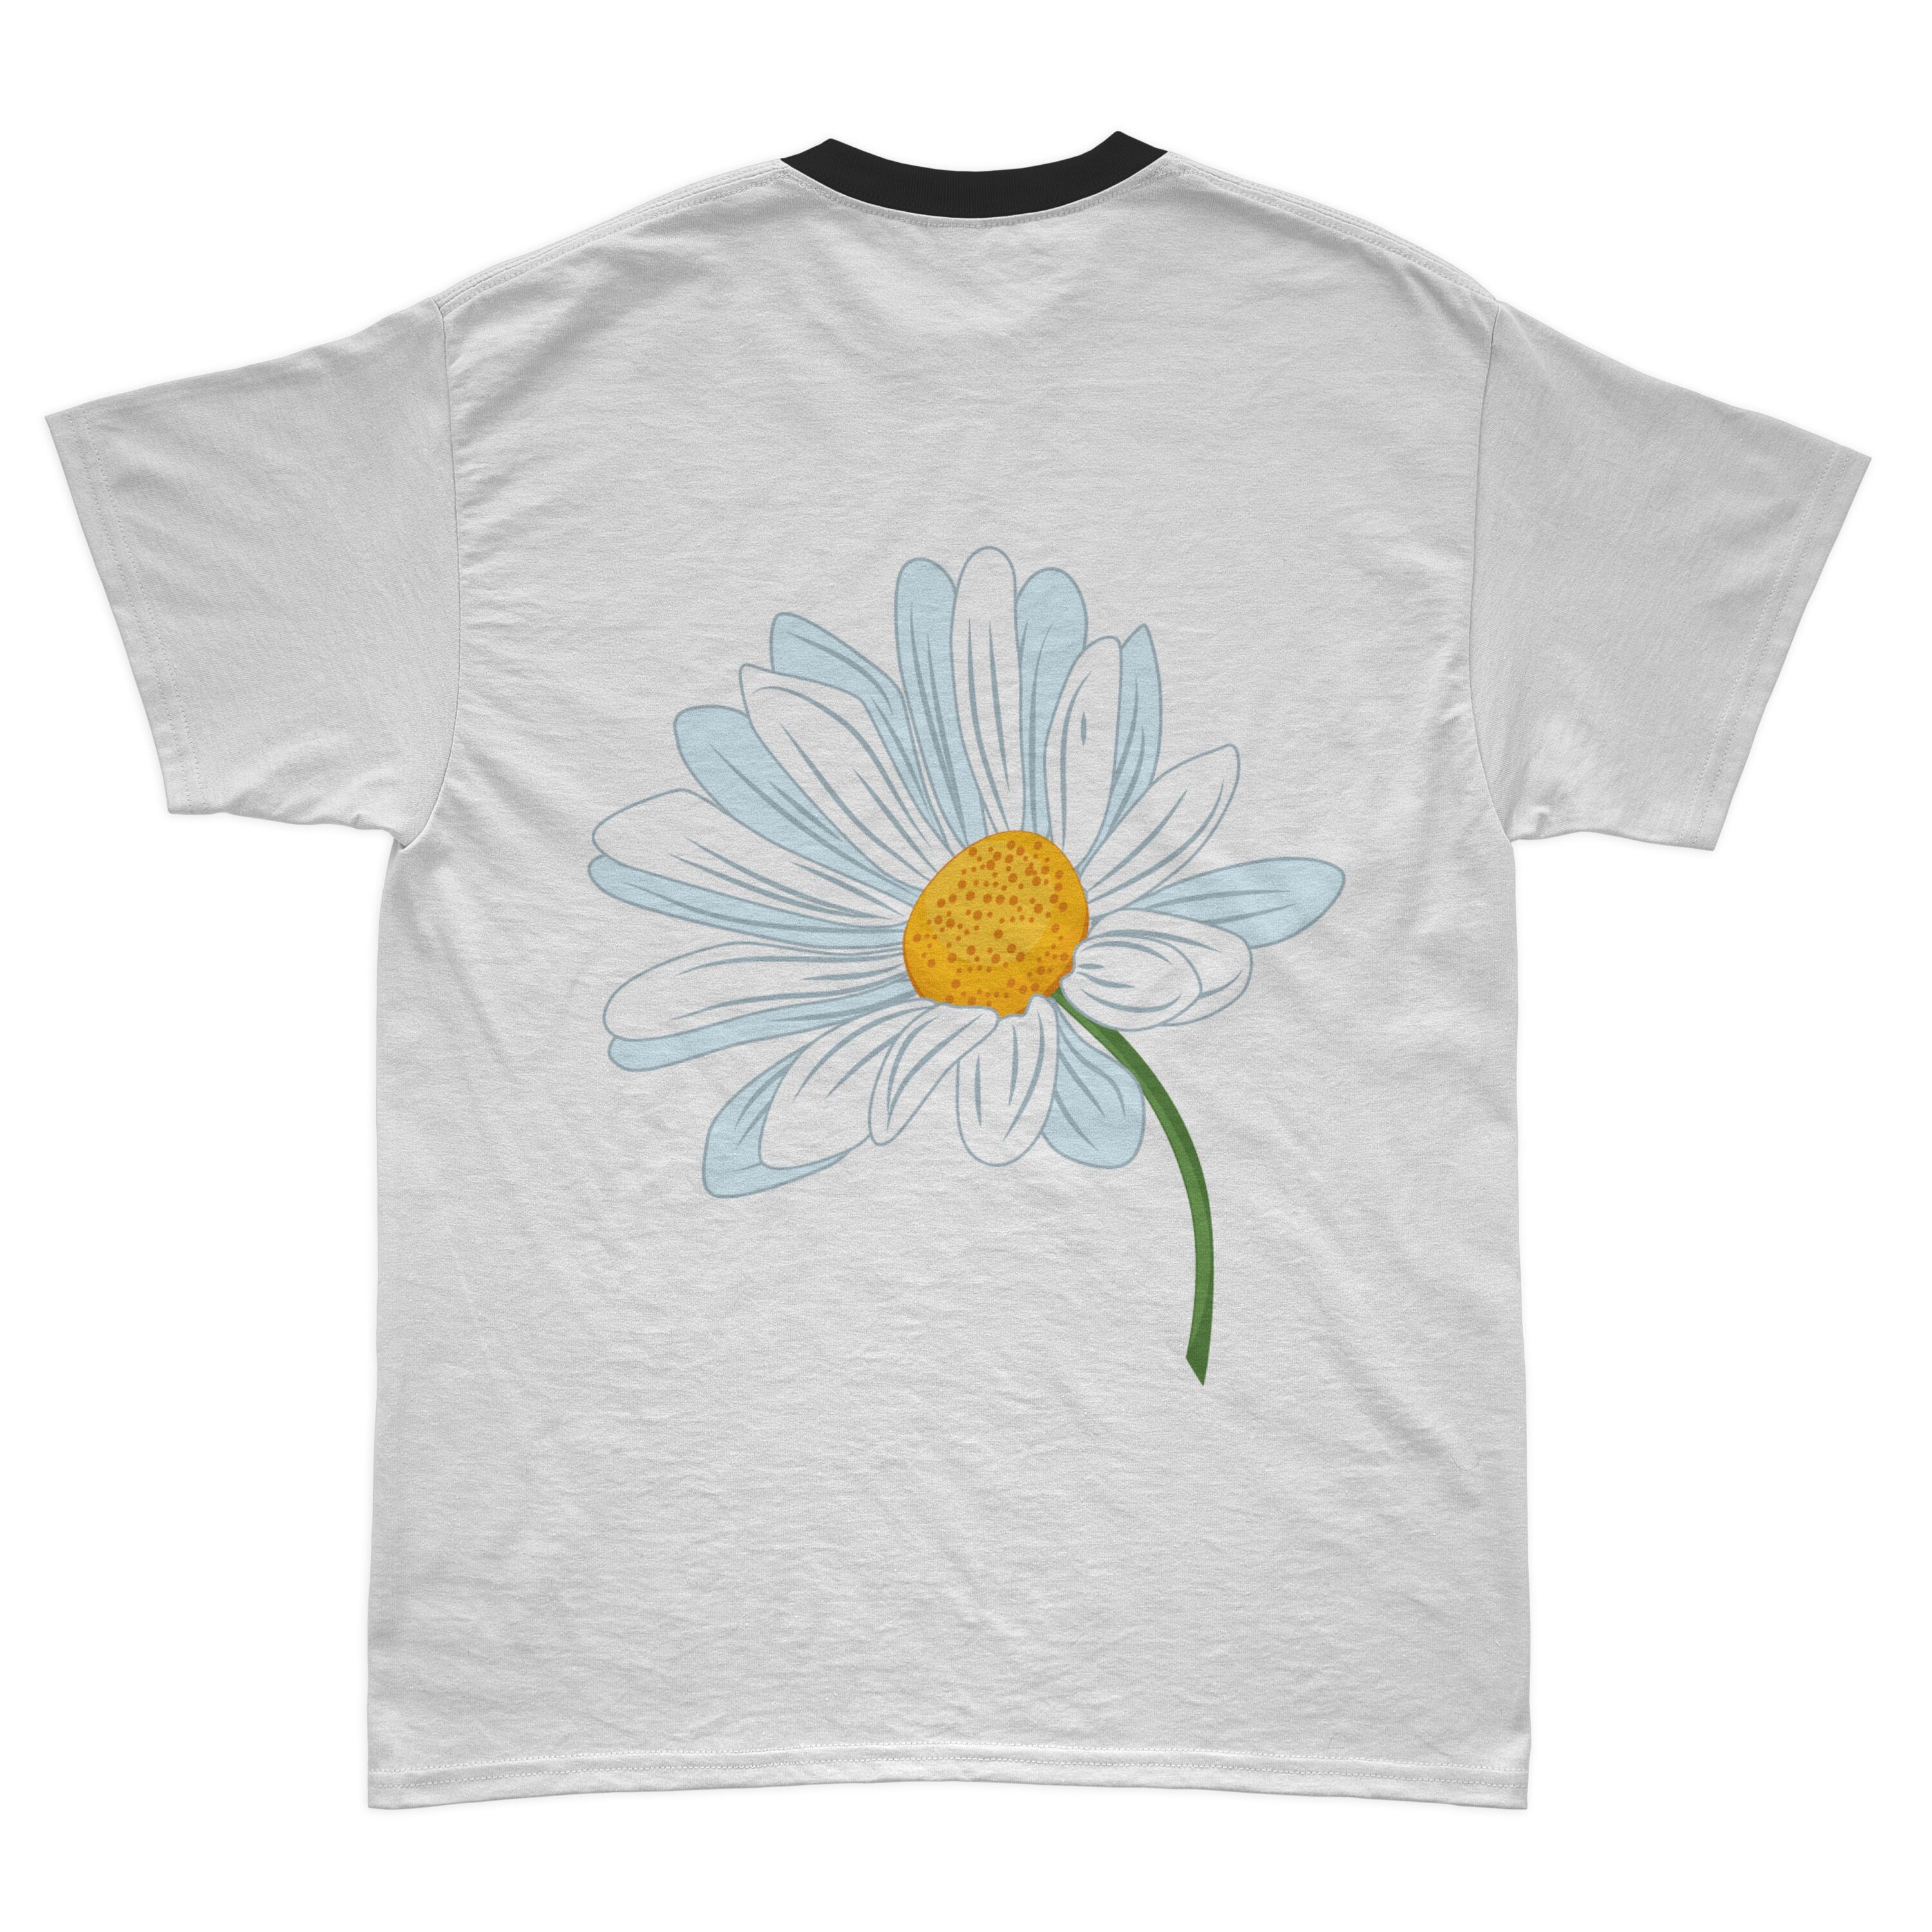 White daisy printed on the t-shirt.